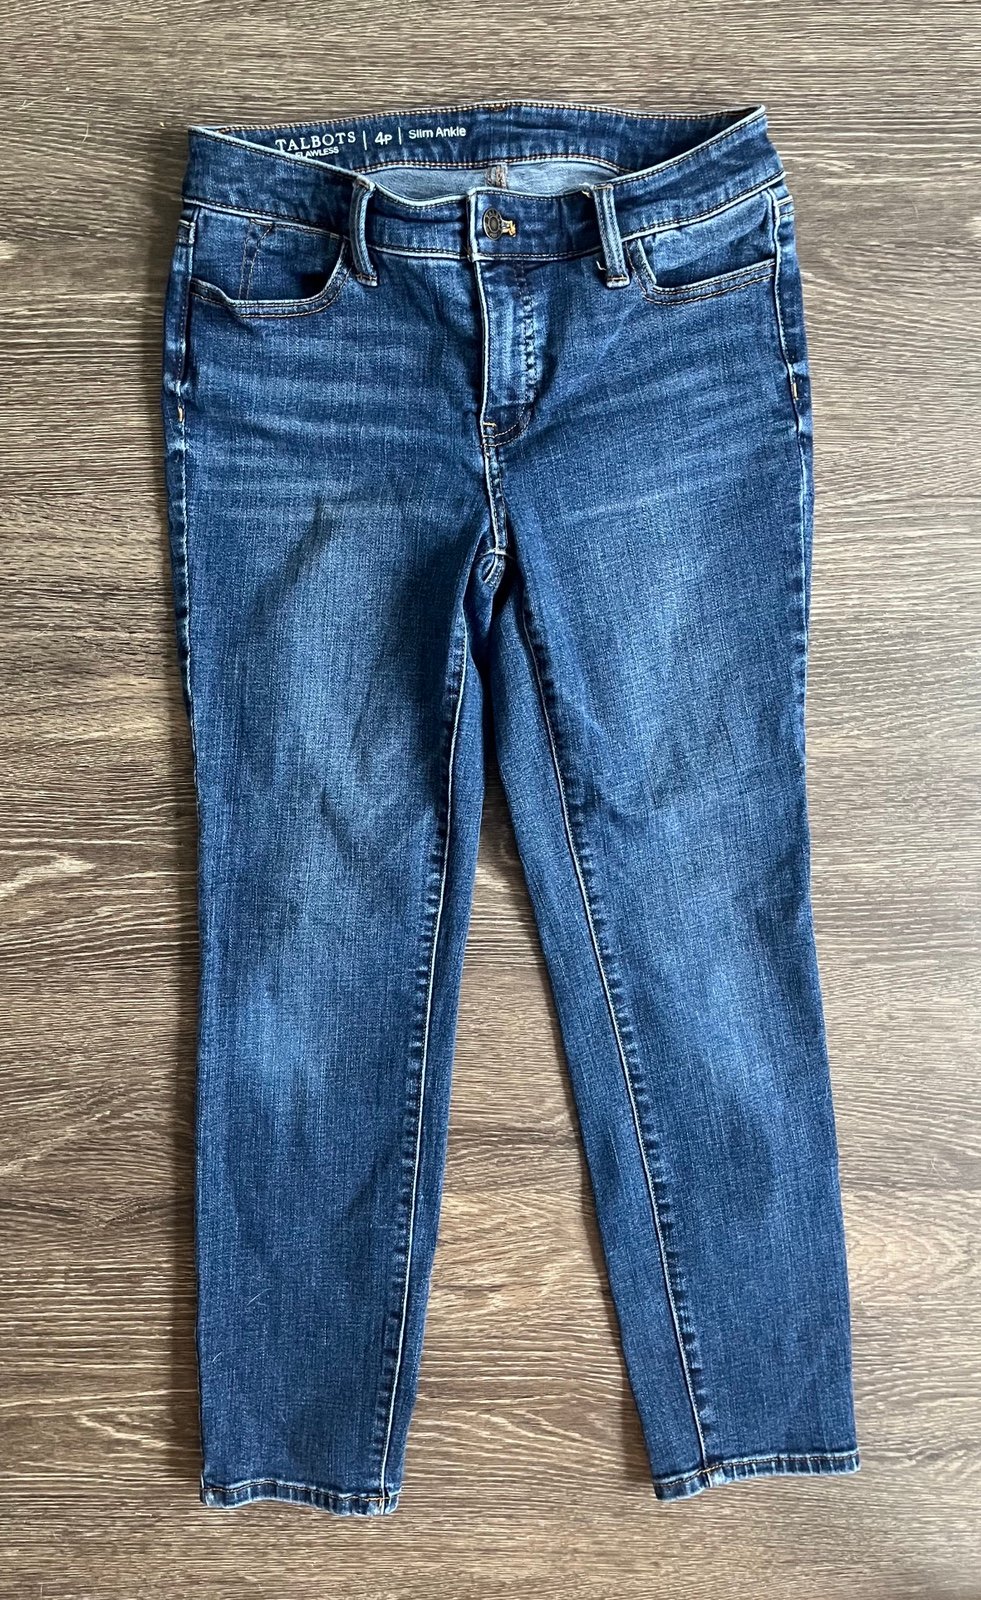 Latest  Talbots slim ankle Jeans Size: 4p nWHeThJPg bes